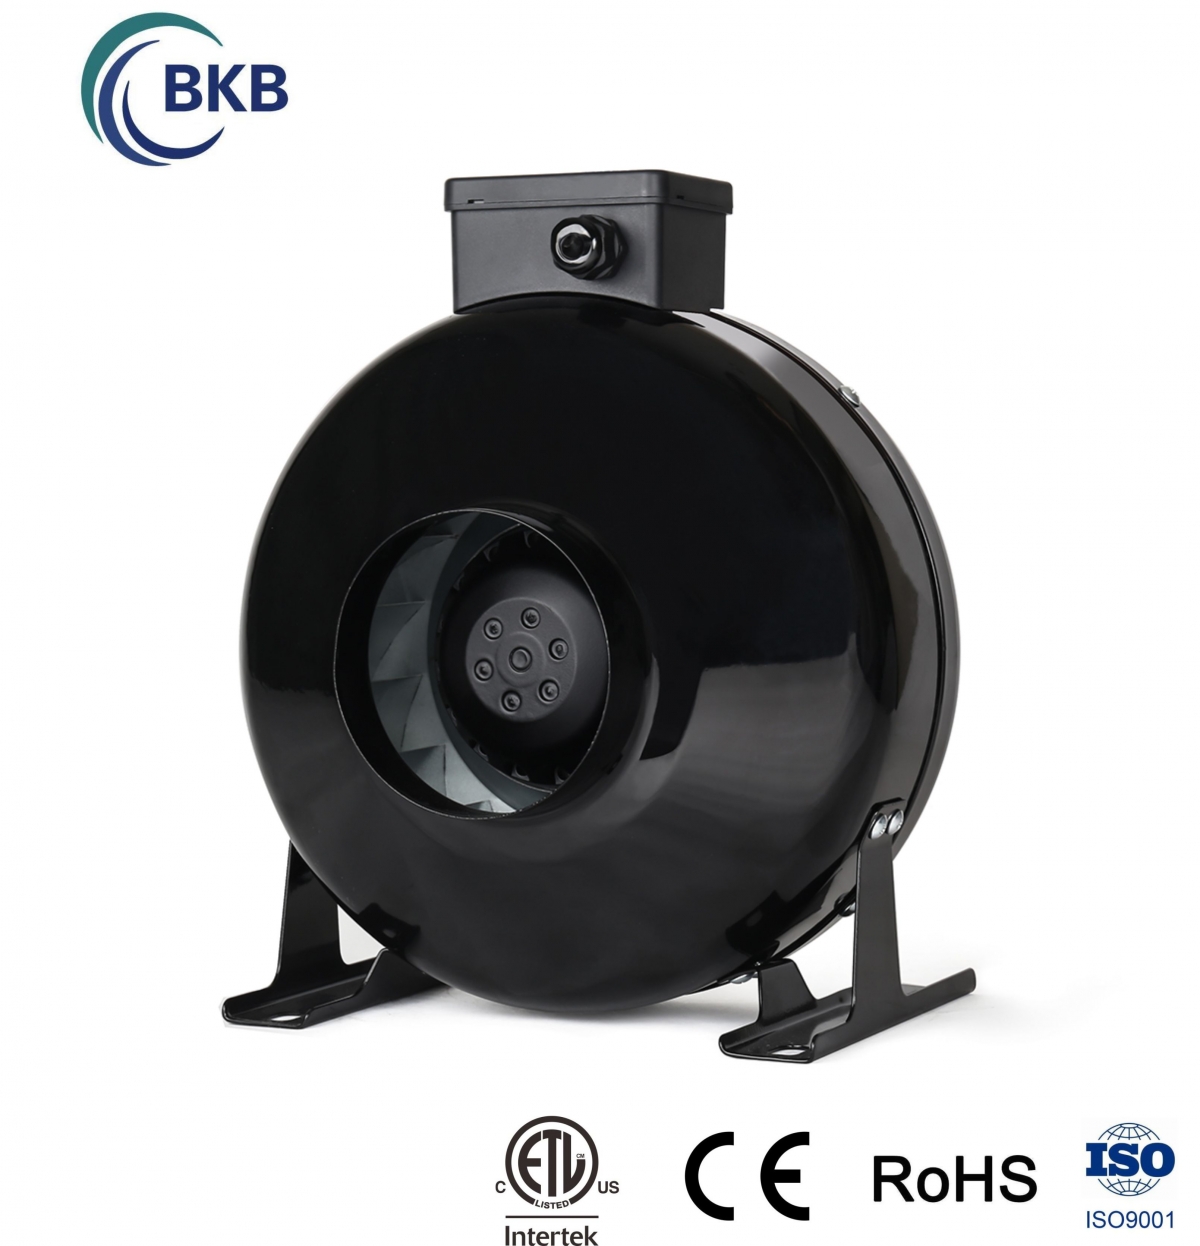 ETL APPROVED centrifugal fan,inline duct fan,carbon filter,fan accessories SUPPLIER AND FACTORY .-SUNLIGHT BLOWER,Centrifugal Fans, Inline Fans,Motors,Backward curved centrifugal fans ,Forward curved centrifugal fans ,inlet fans, EC fans